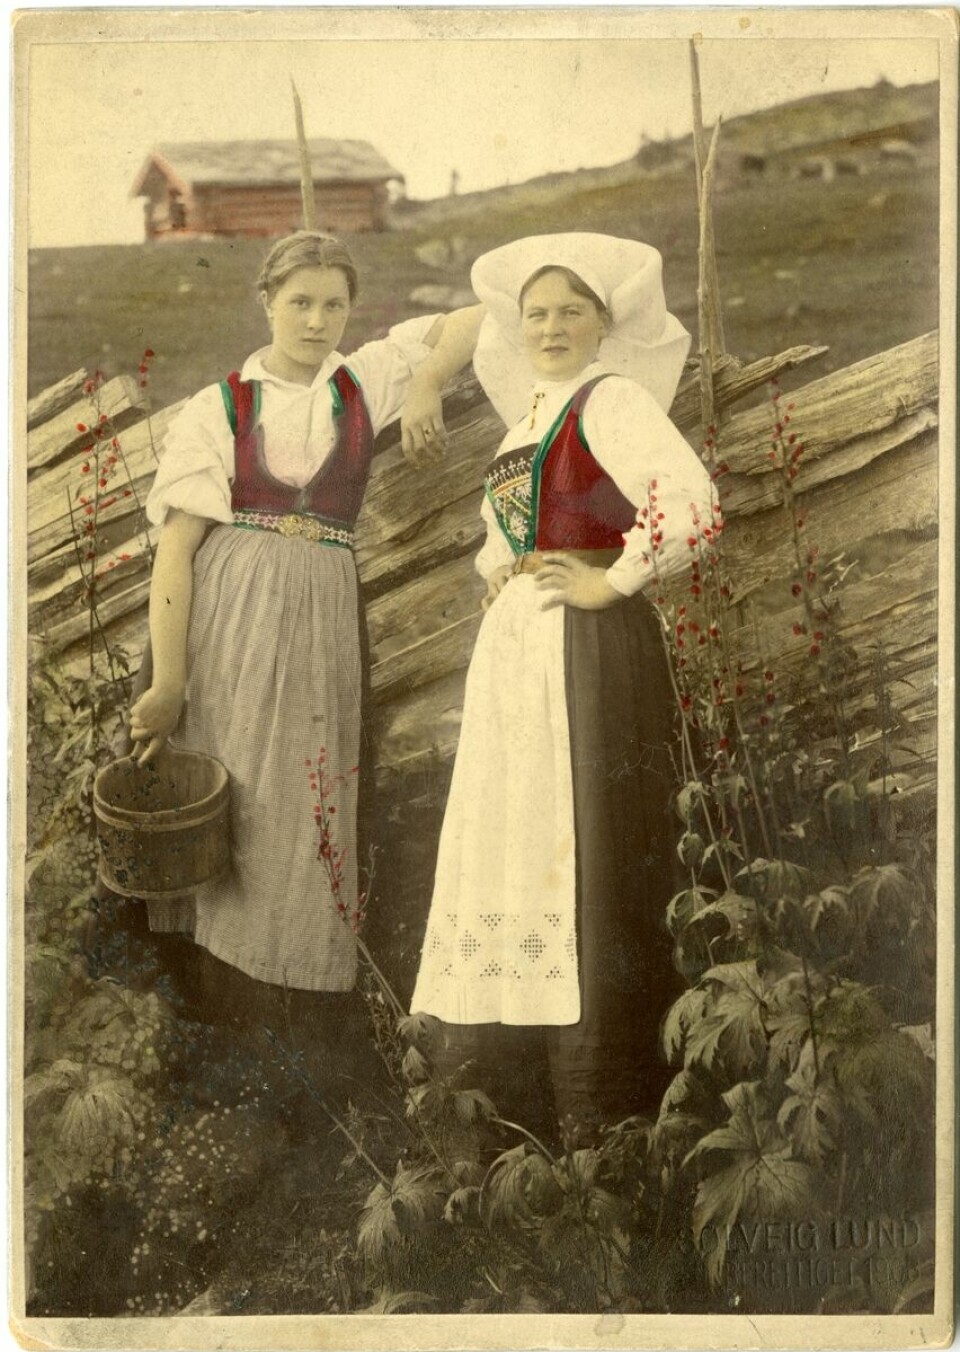 Solveig Lund established herself as a photographer in 1892. One of the themes in her photographs are portraits of women dressed in bunads, in the studio and outdoors. More of Lund’s photos can be seen at digitaltmuseum.no. The women in this photo are wearing a traditional costume from Hardanger.